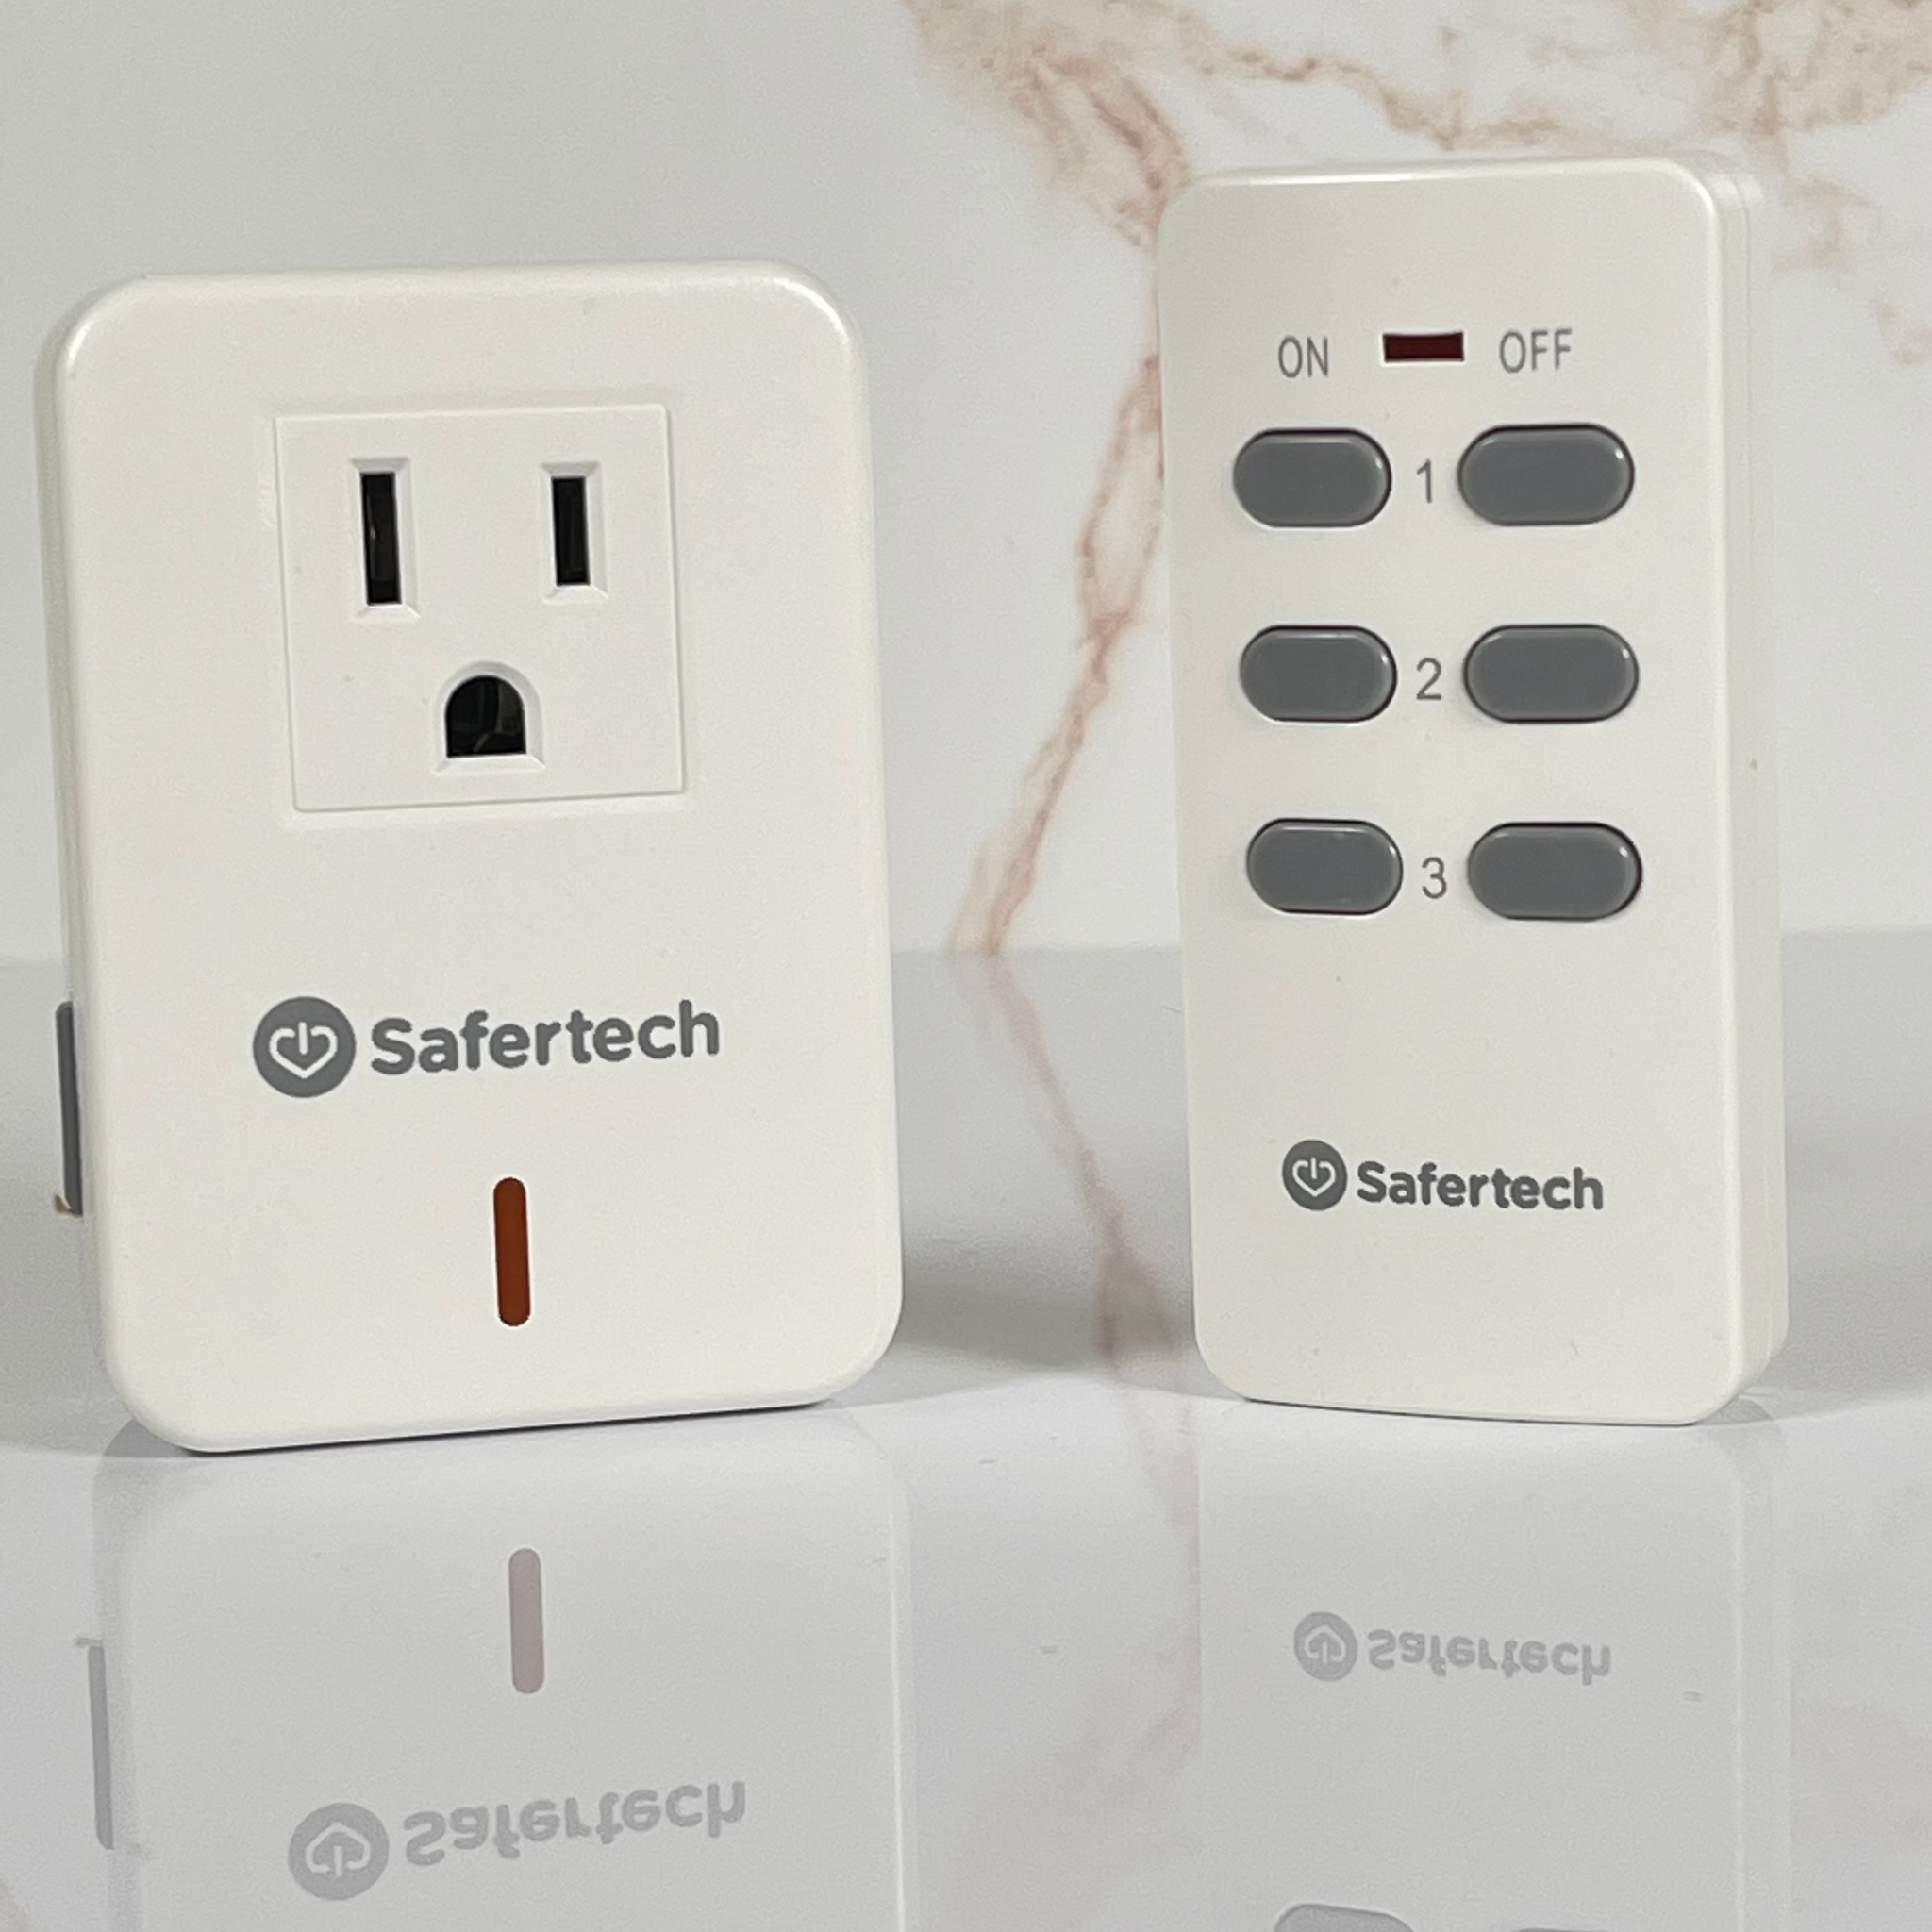 Remote Control Outlet Switch UNDER $10 - Lights, Fans & more! 